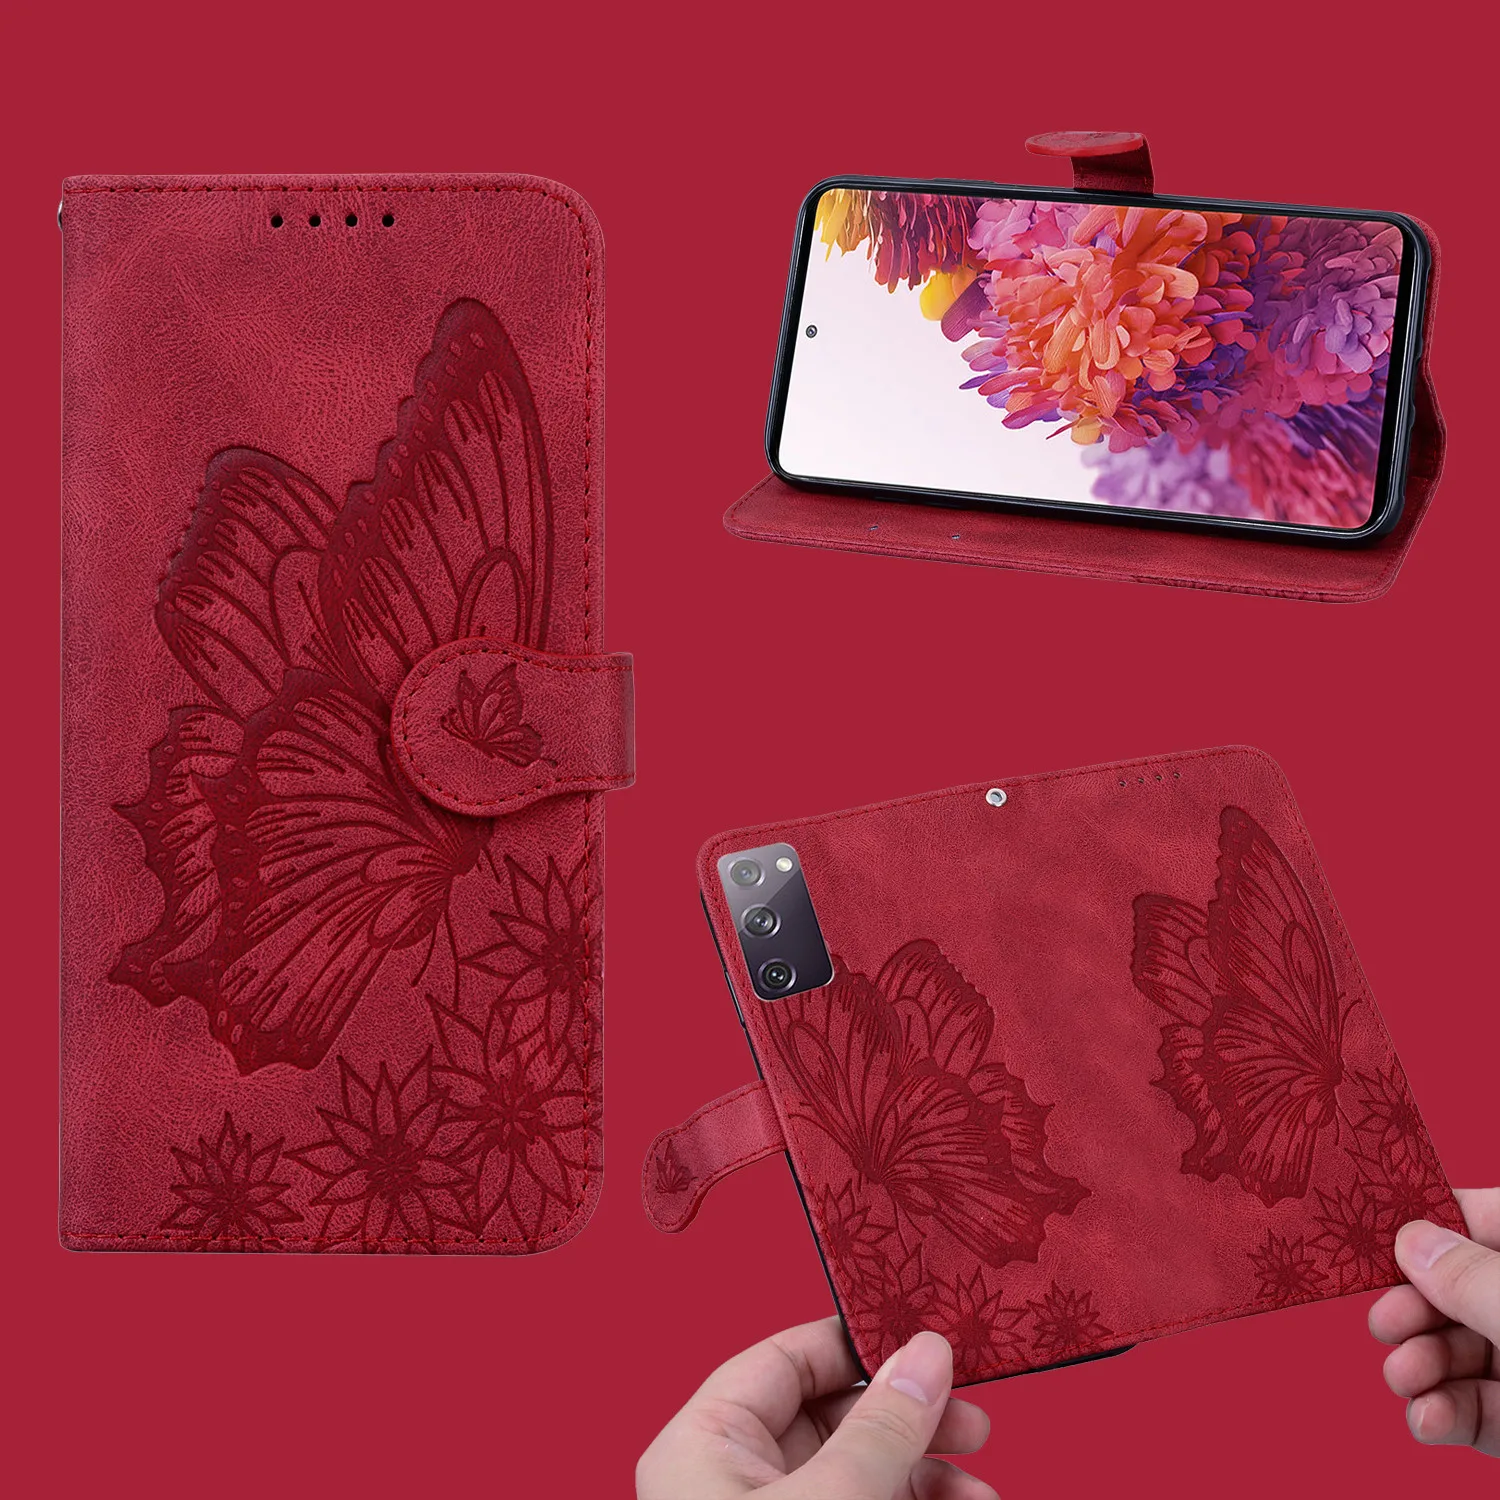 case for iphone 13 pro max Luxury 3D Butterfly Leather Wallet Case For iPhone 13 Mini 11 12 Pro X XS Max XR 7 8 6 6S Plus SE 2020 Flip Holder Stand Cover iphone 13 pro max case